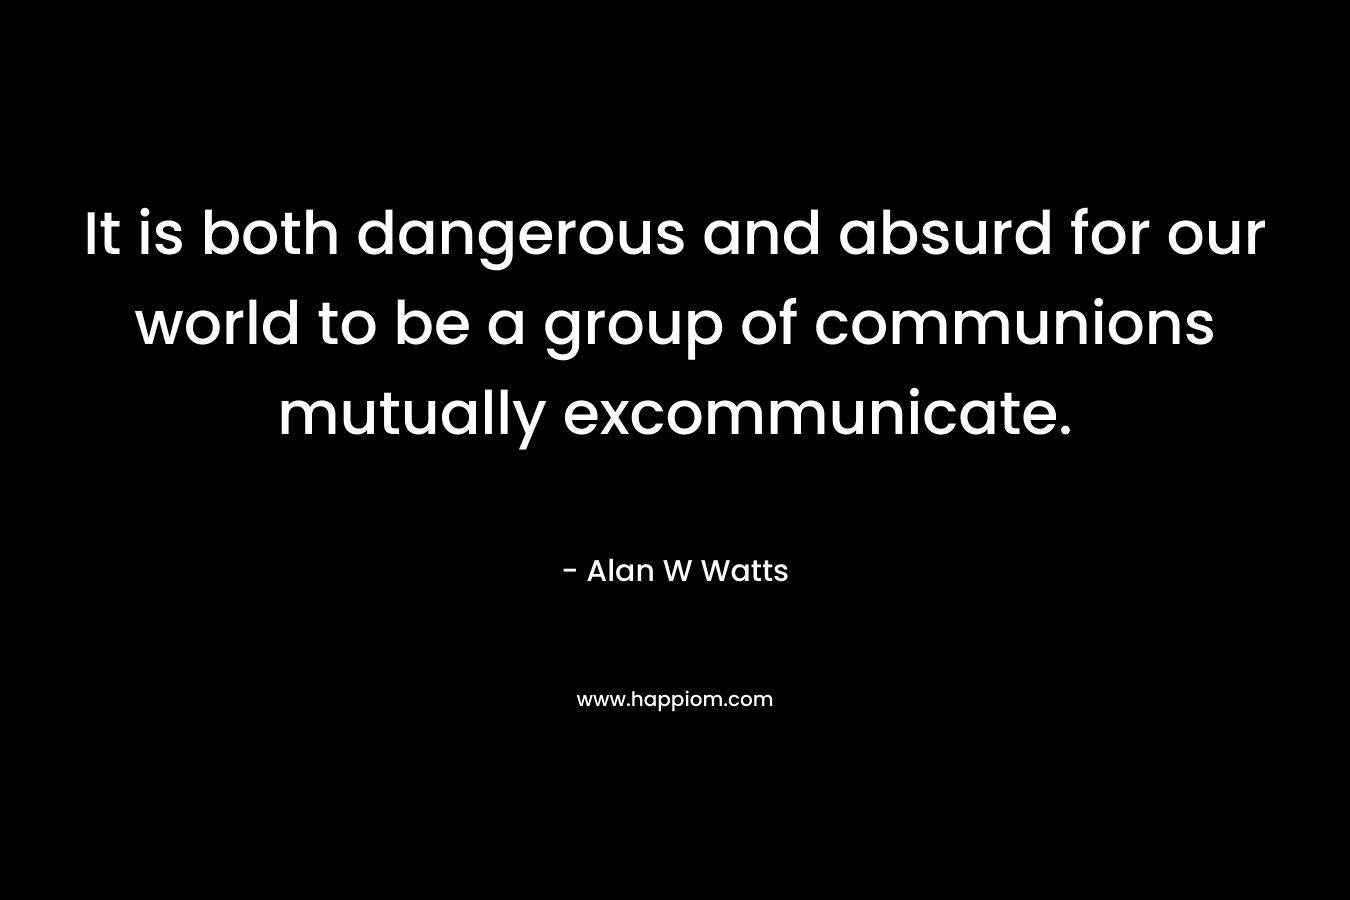 It is both dangerous and absurd for our world to be a group of communions mutually excommunicate. – Alan W Watts